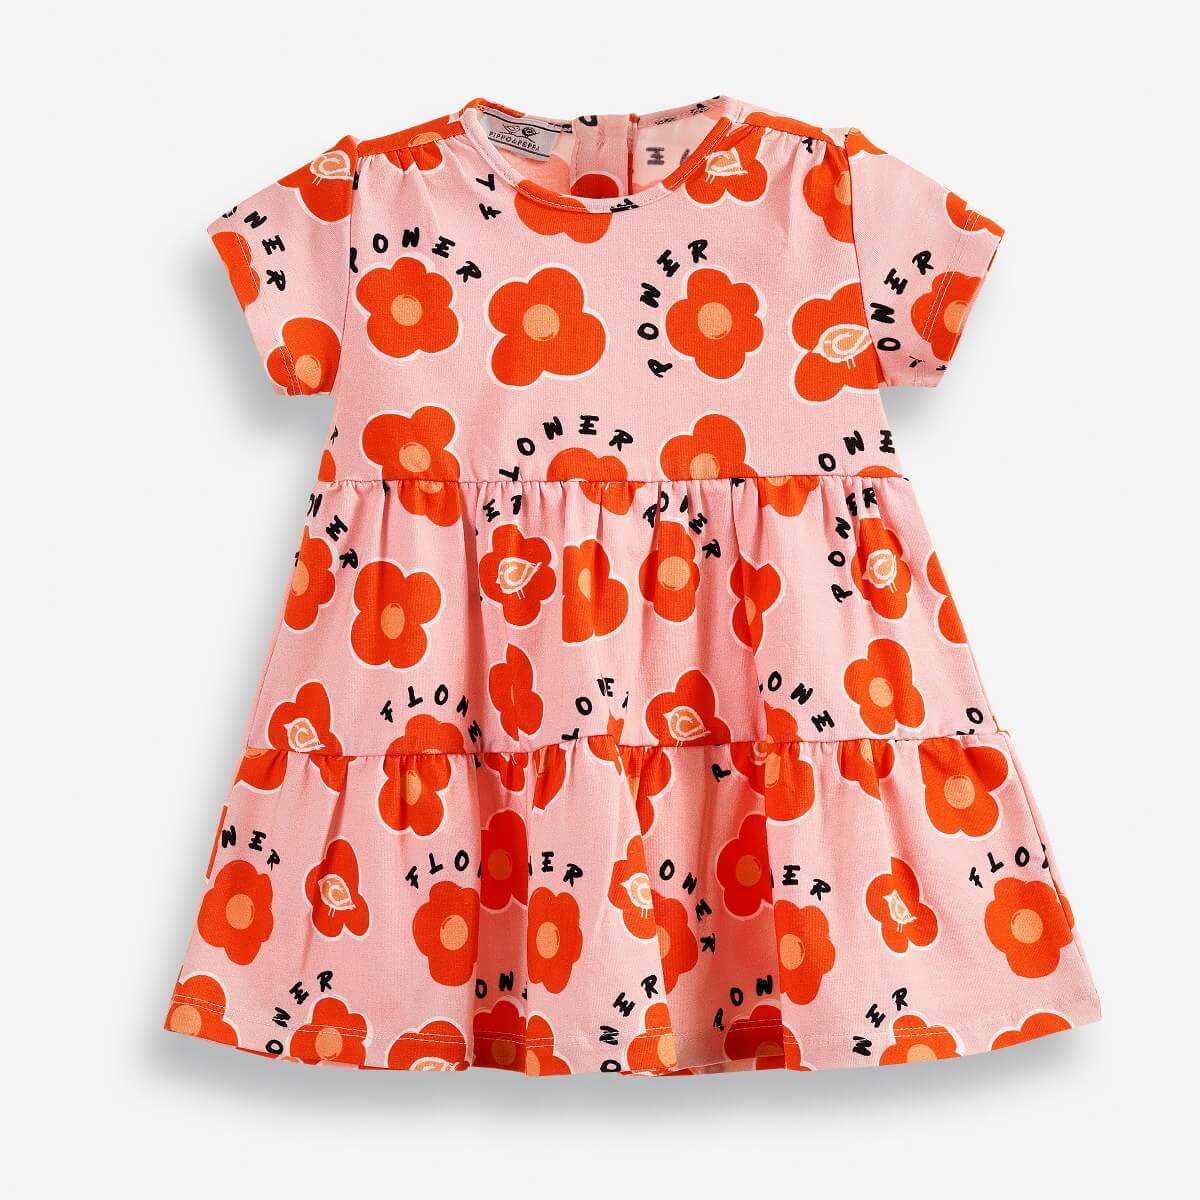 Baby Girls' Dress with an All-Over Floral Print